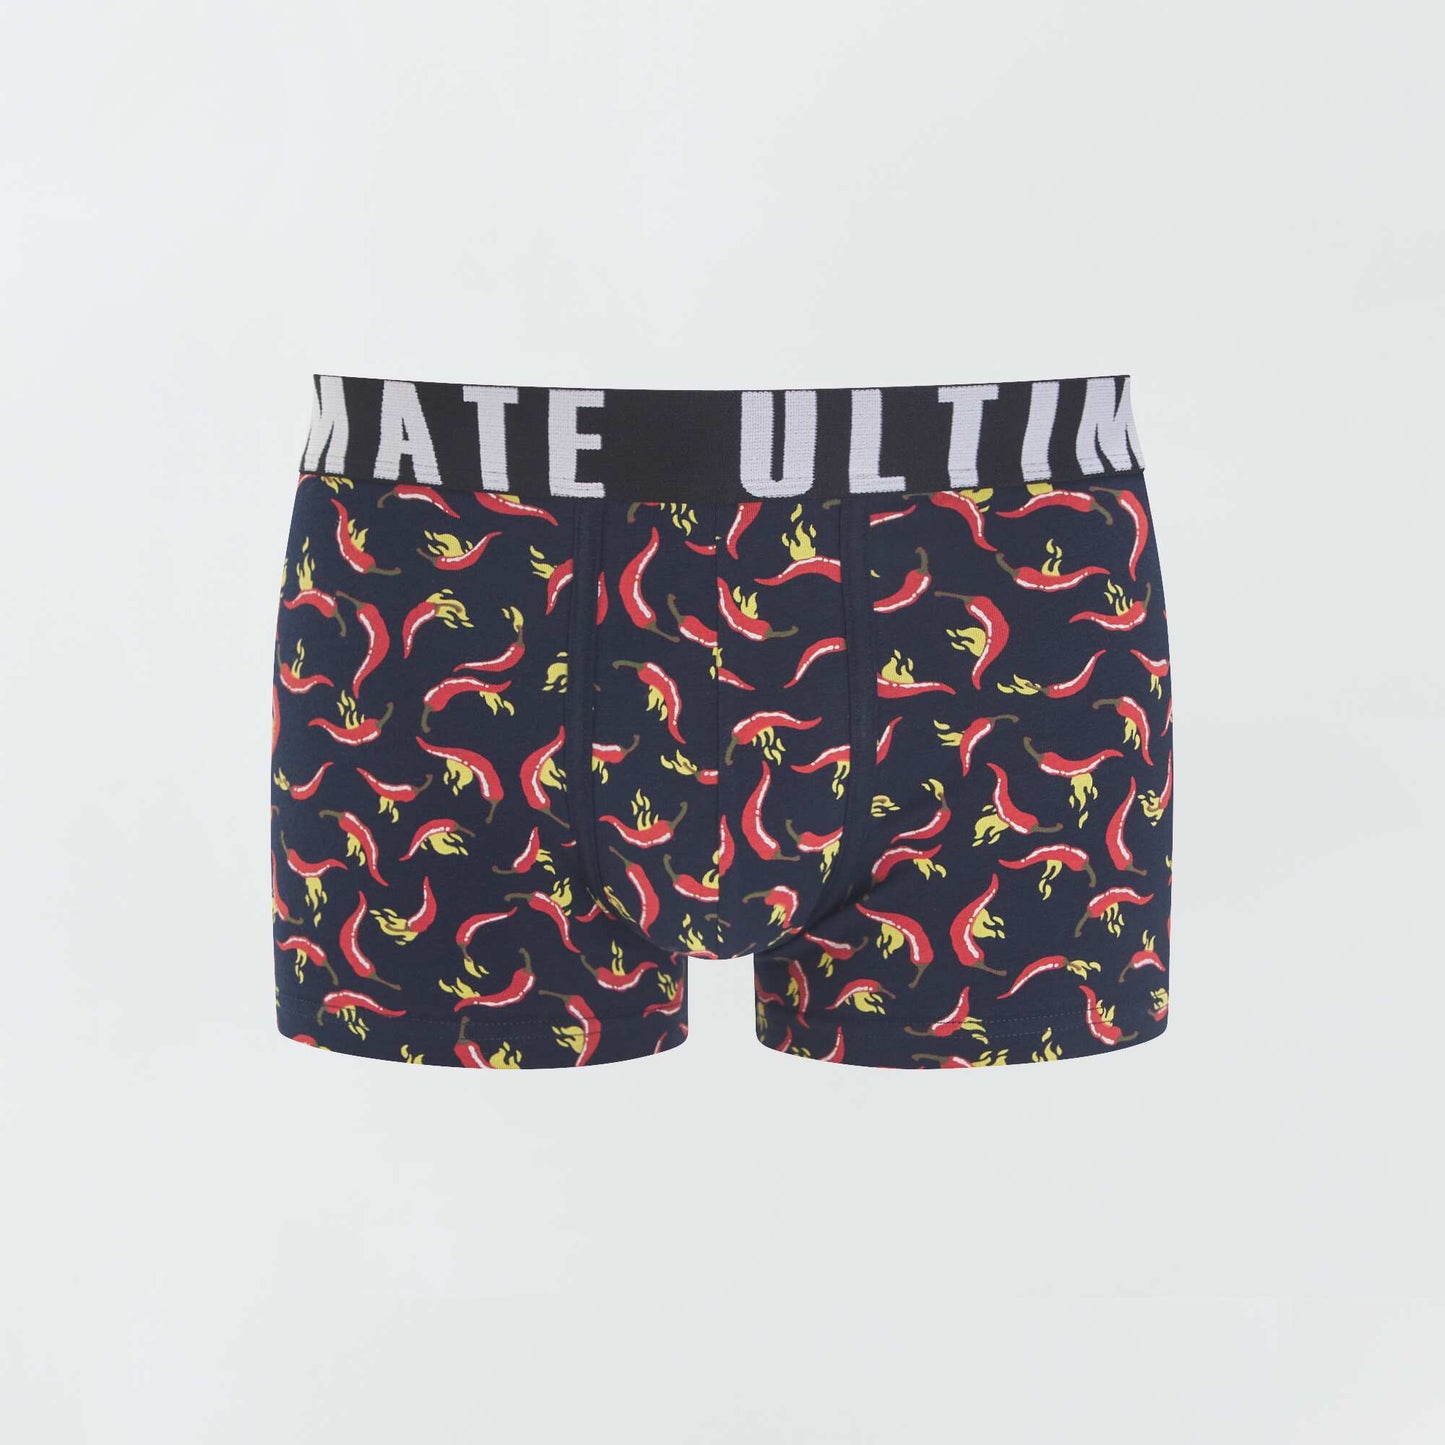 Pack of 3 patterned boxer shorts PEPPERS